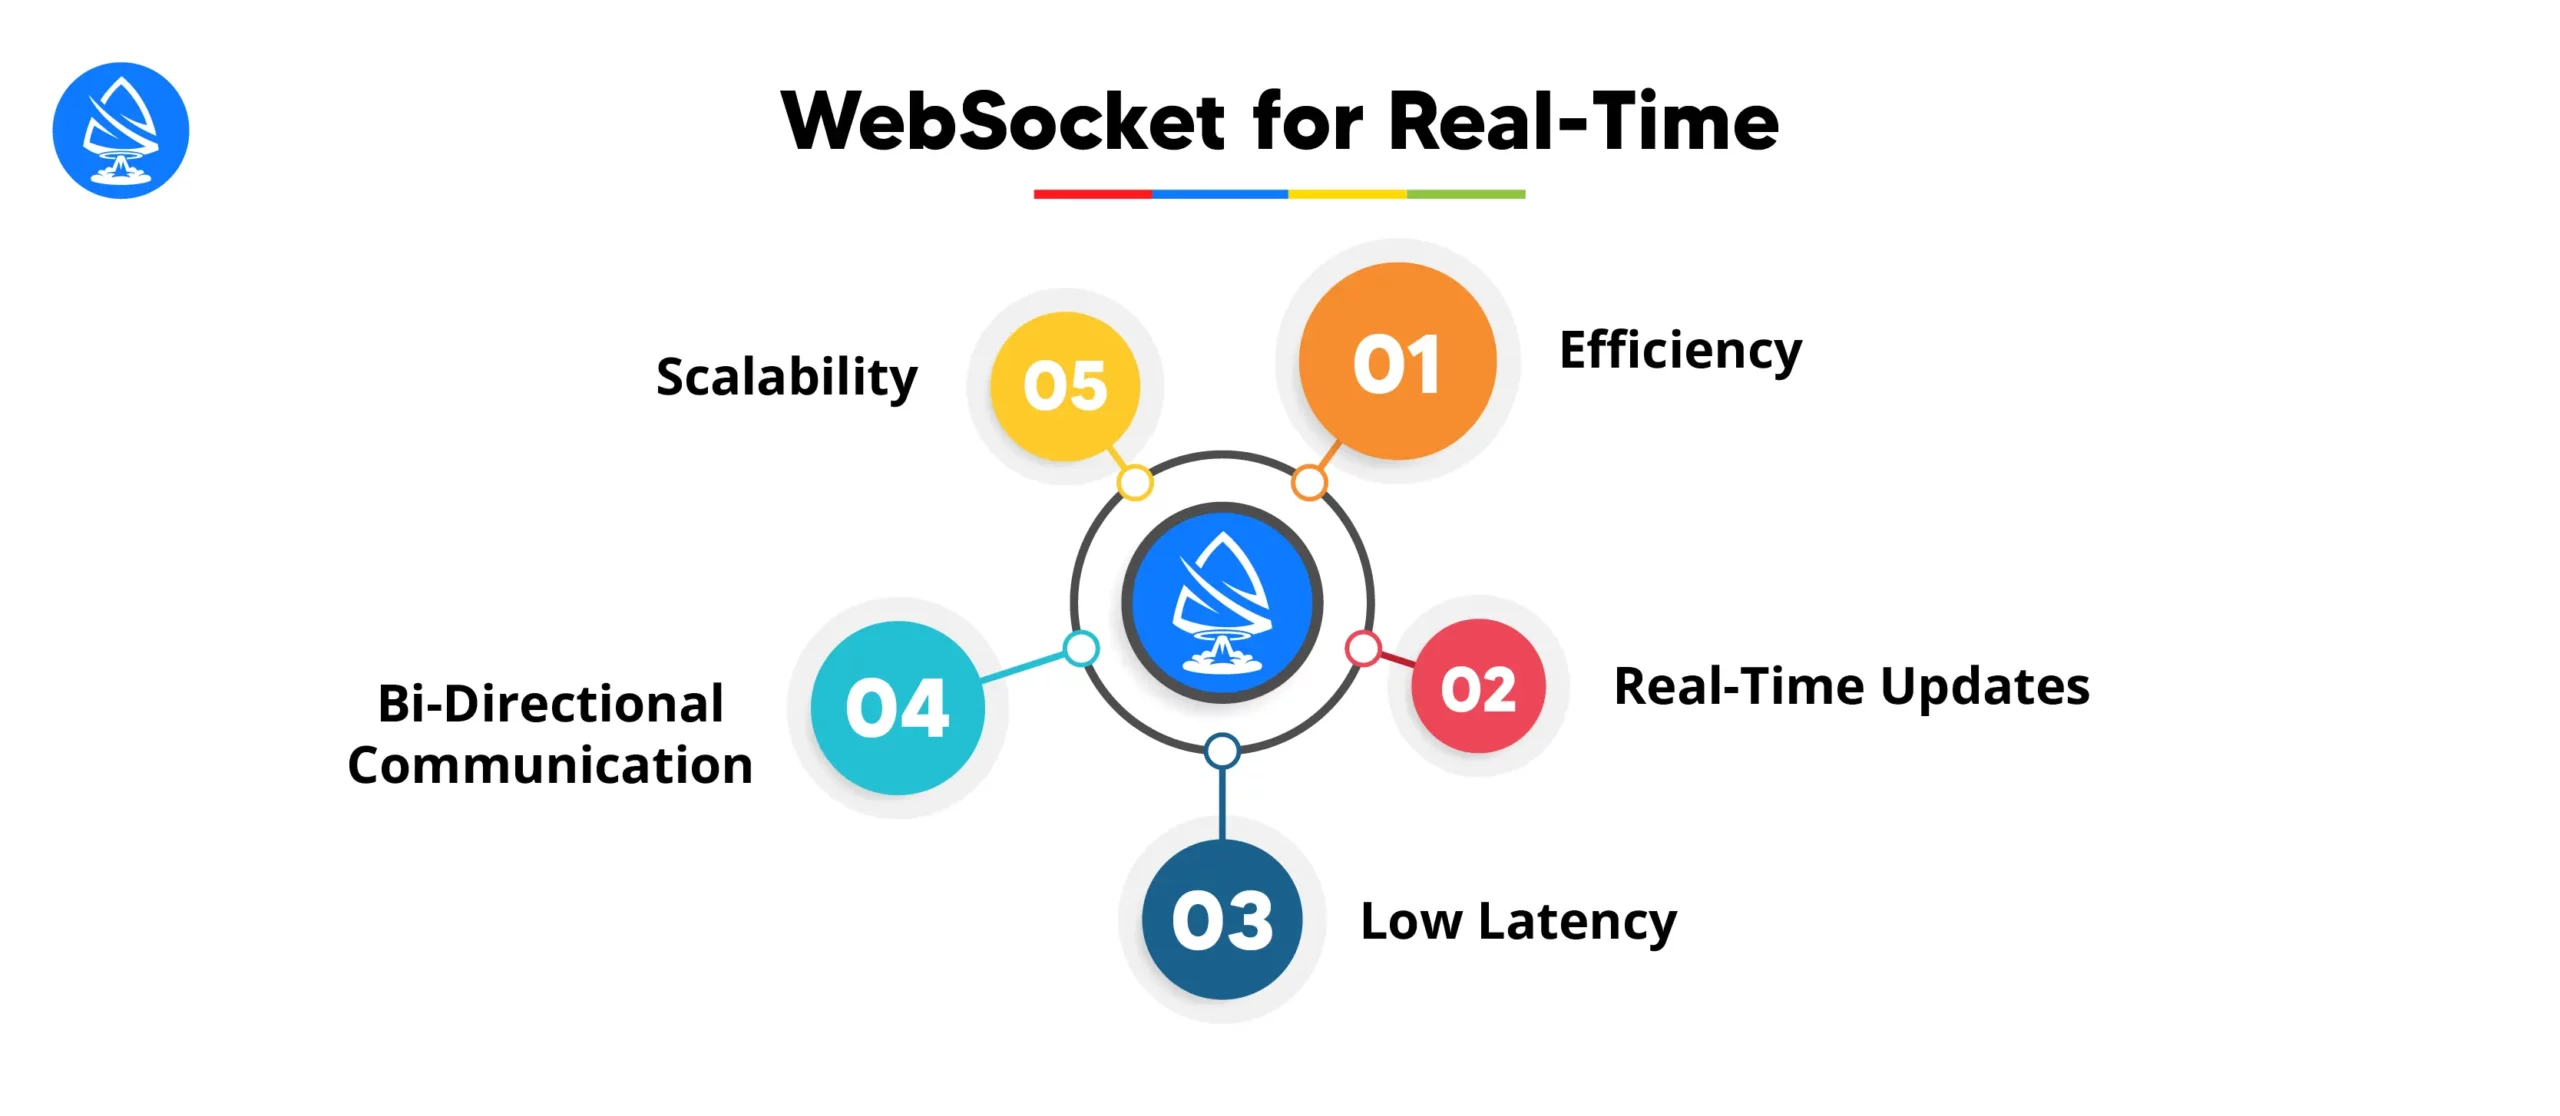 Why should one use WebSocket for real-time communication? 